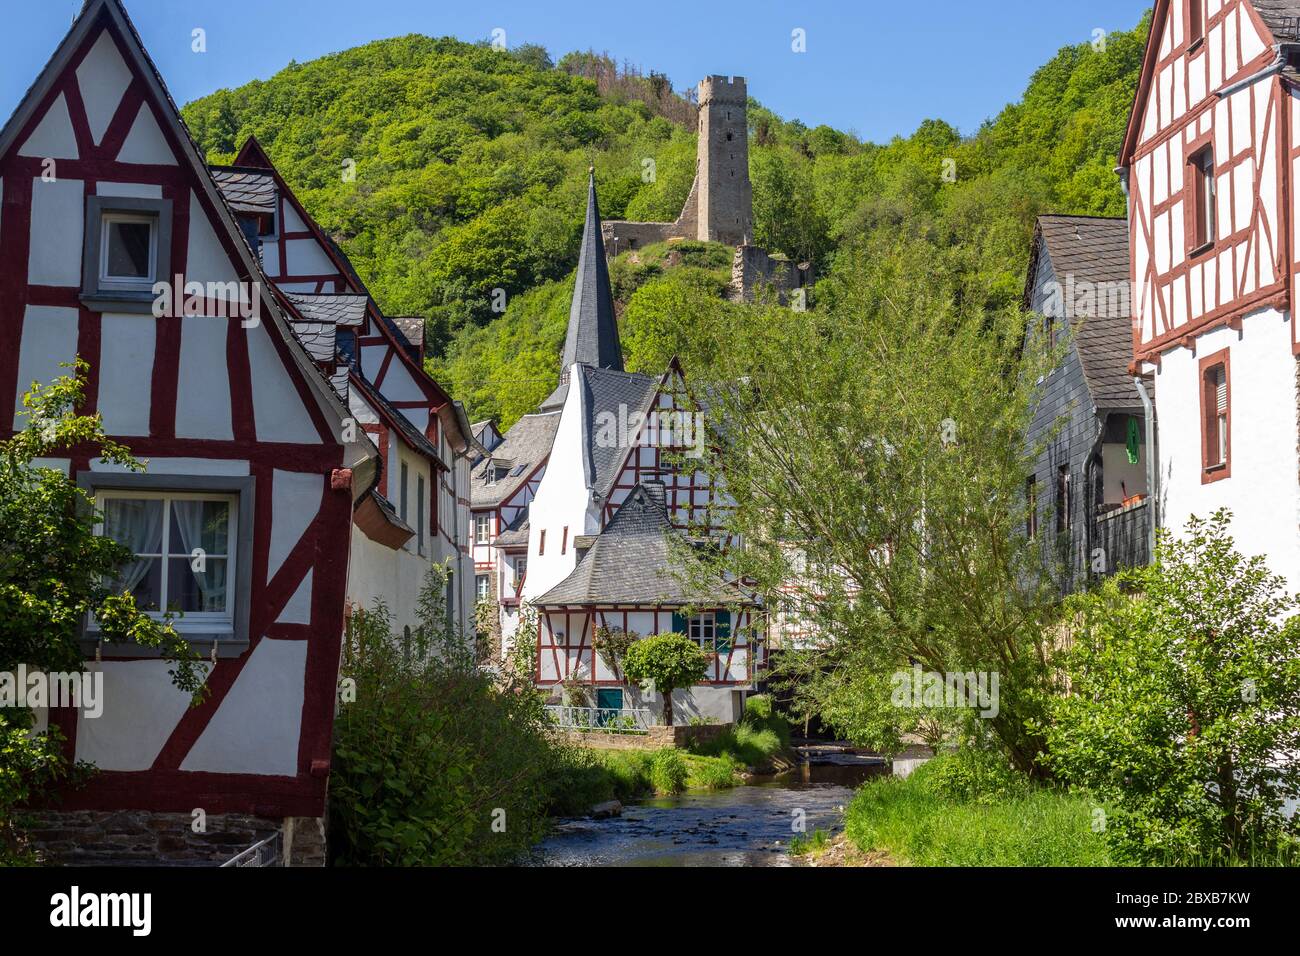 The village Monreal with river elz, half-timbered houses and castle Loewenburg in the background Stock Photo